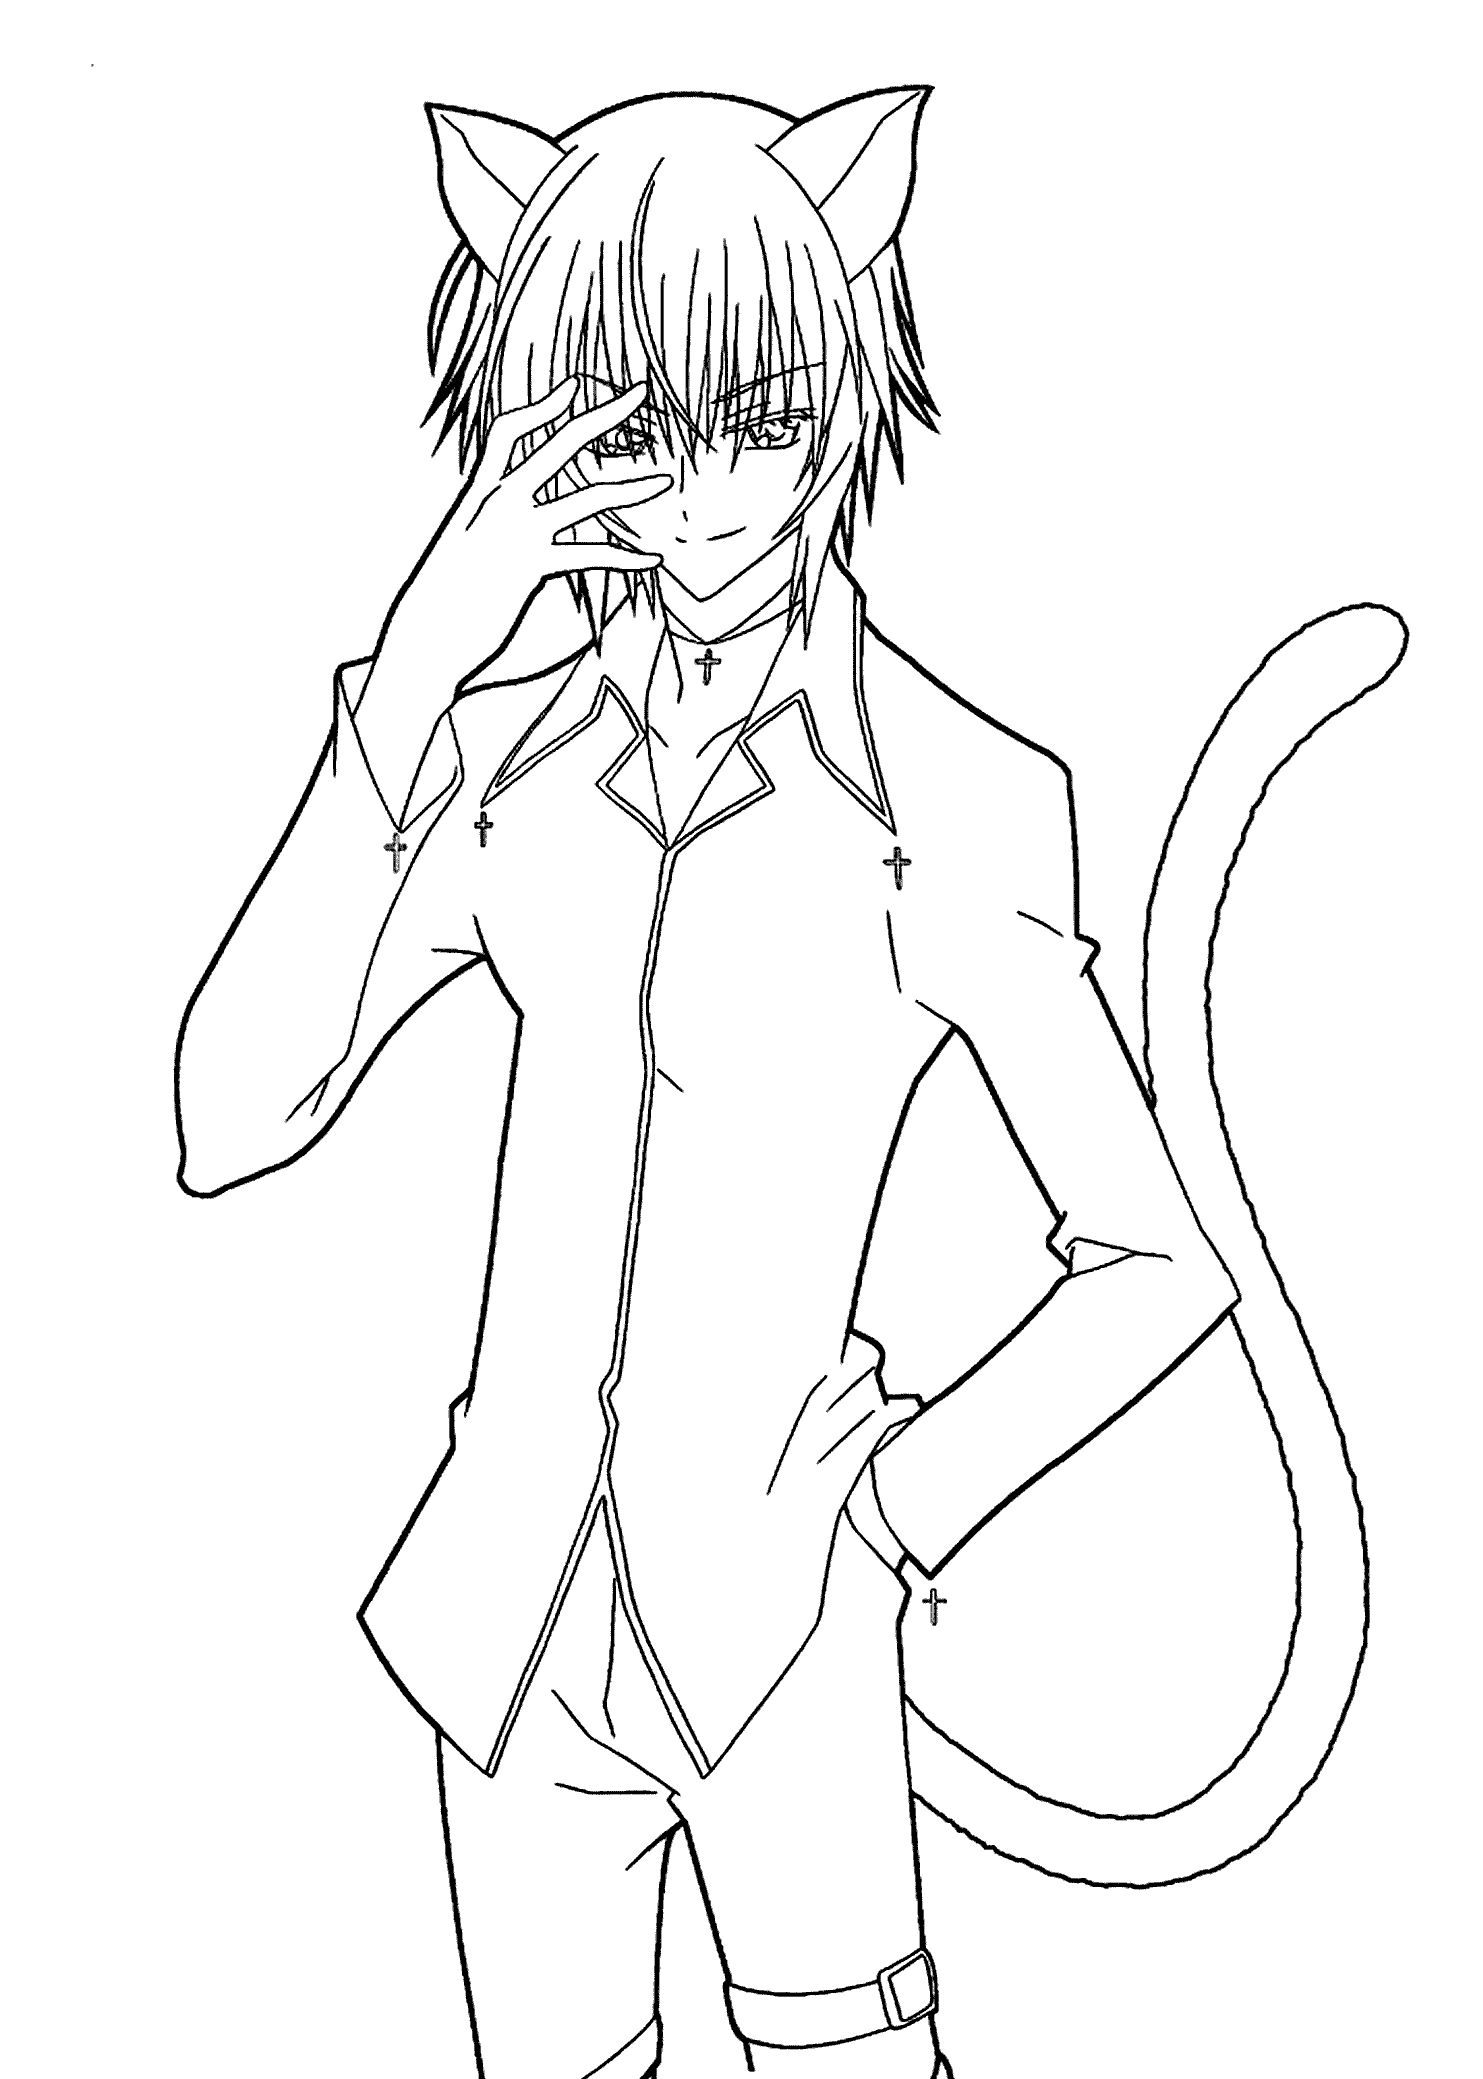 Anime Animals Coloring Pages For Adults - Coloring Home